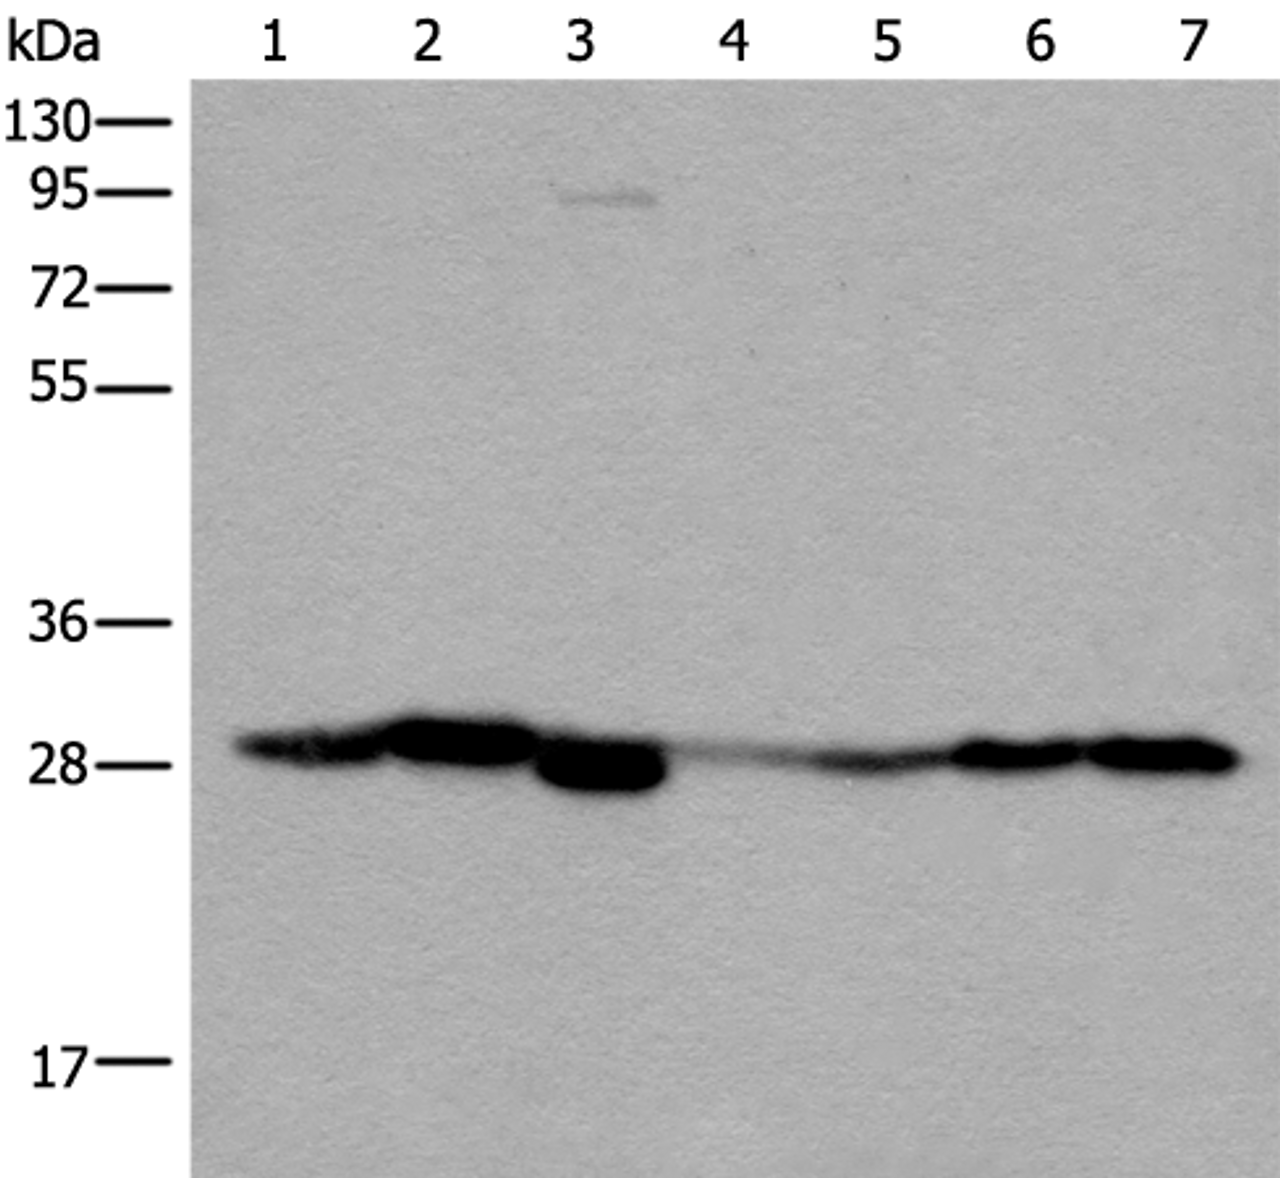 Western blot analysis of Human kidney tissue RAW264.7 cell Mouse kidney tissue Human lung tissue Human fetal liver tissue Hela and 231 cell lysates  using VTI1B Polyclonal Antibody at dilution of 1:300